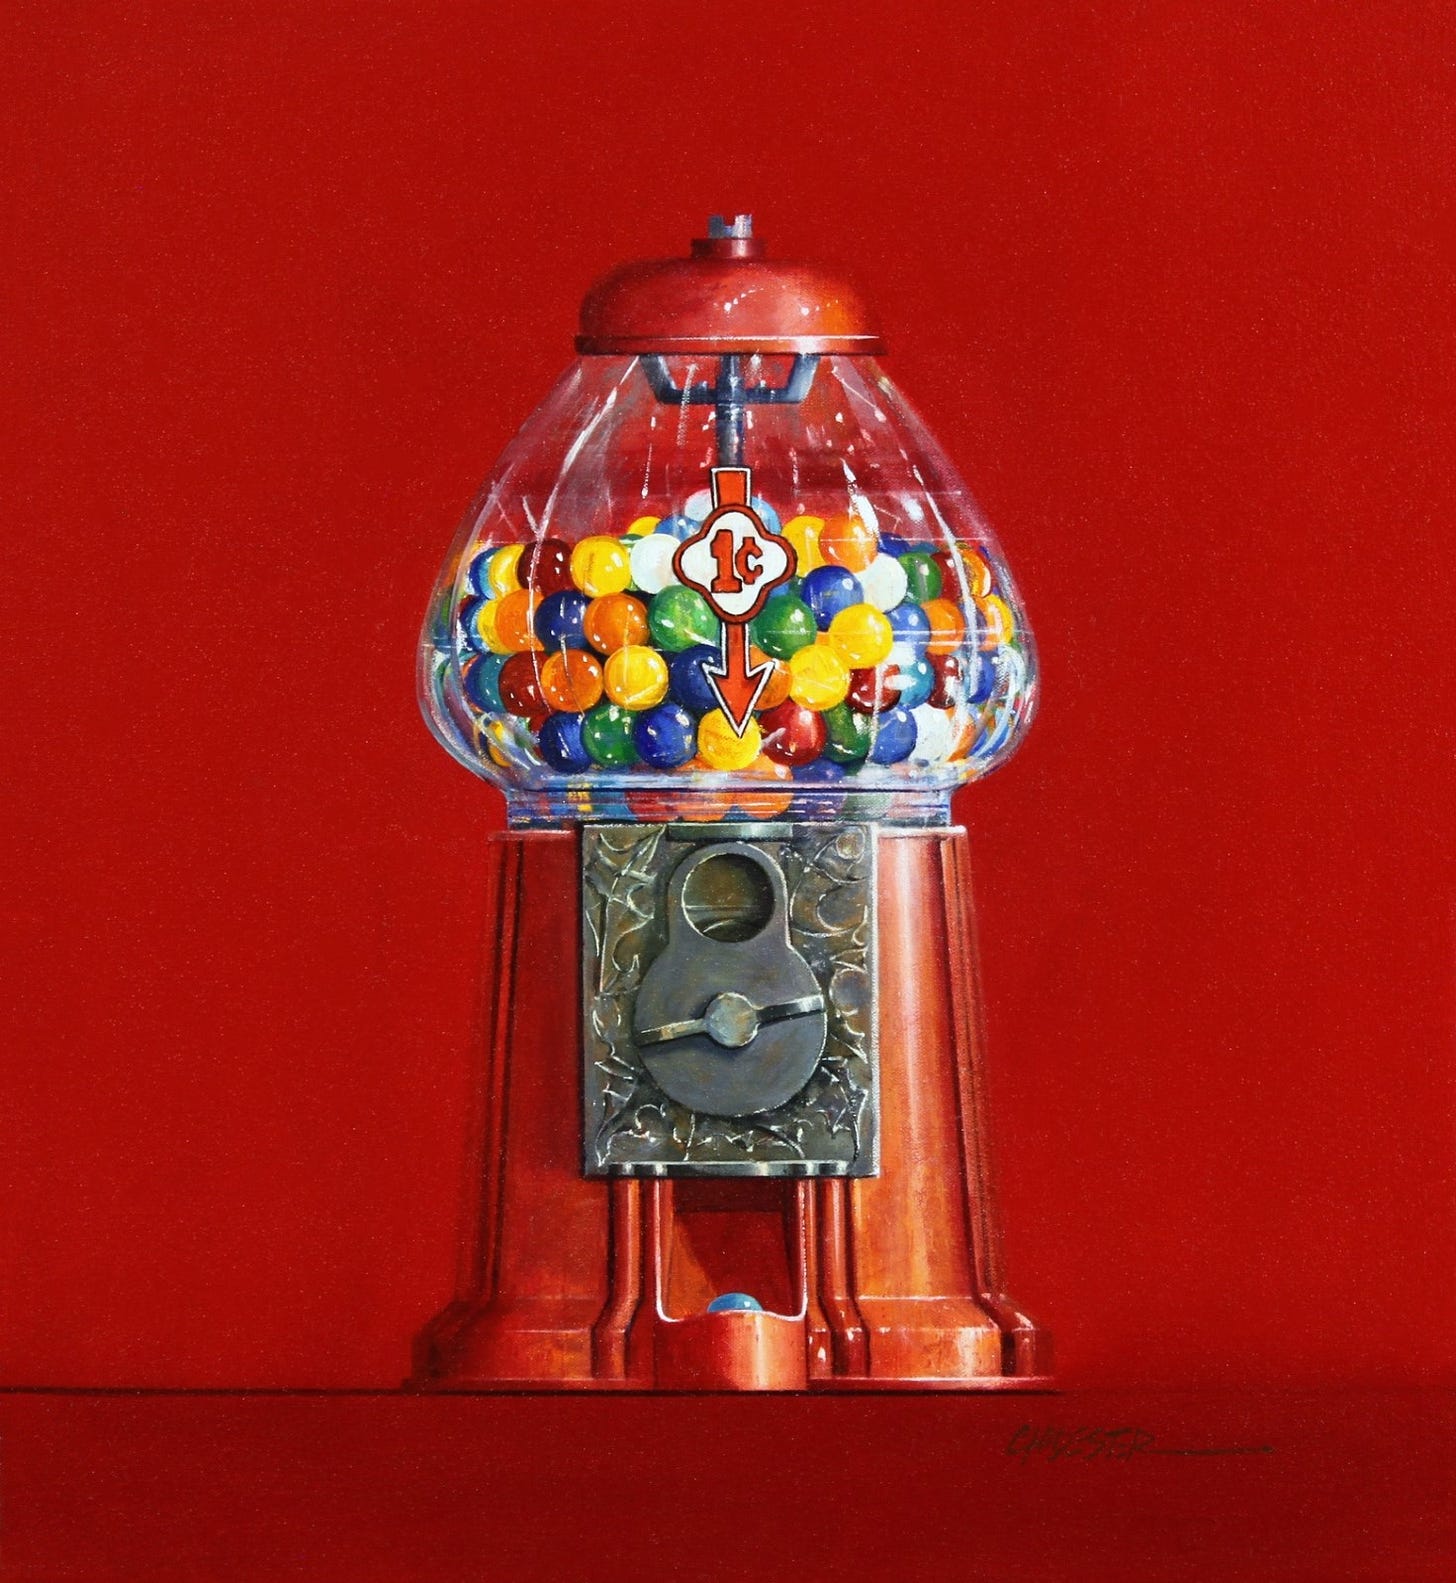 A red gumball machine with a red background

Description automatically generated